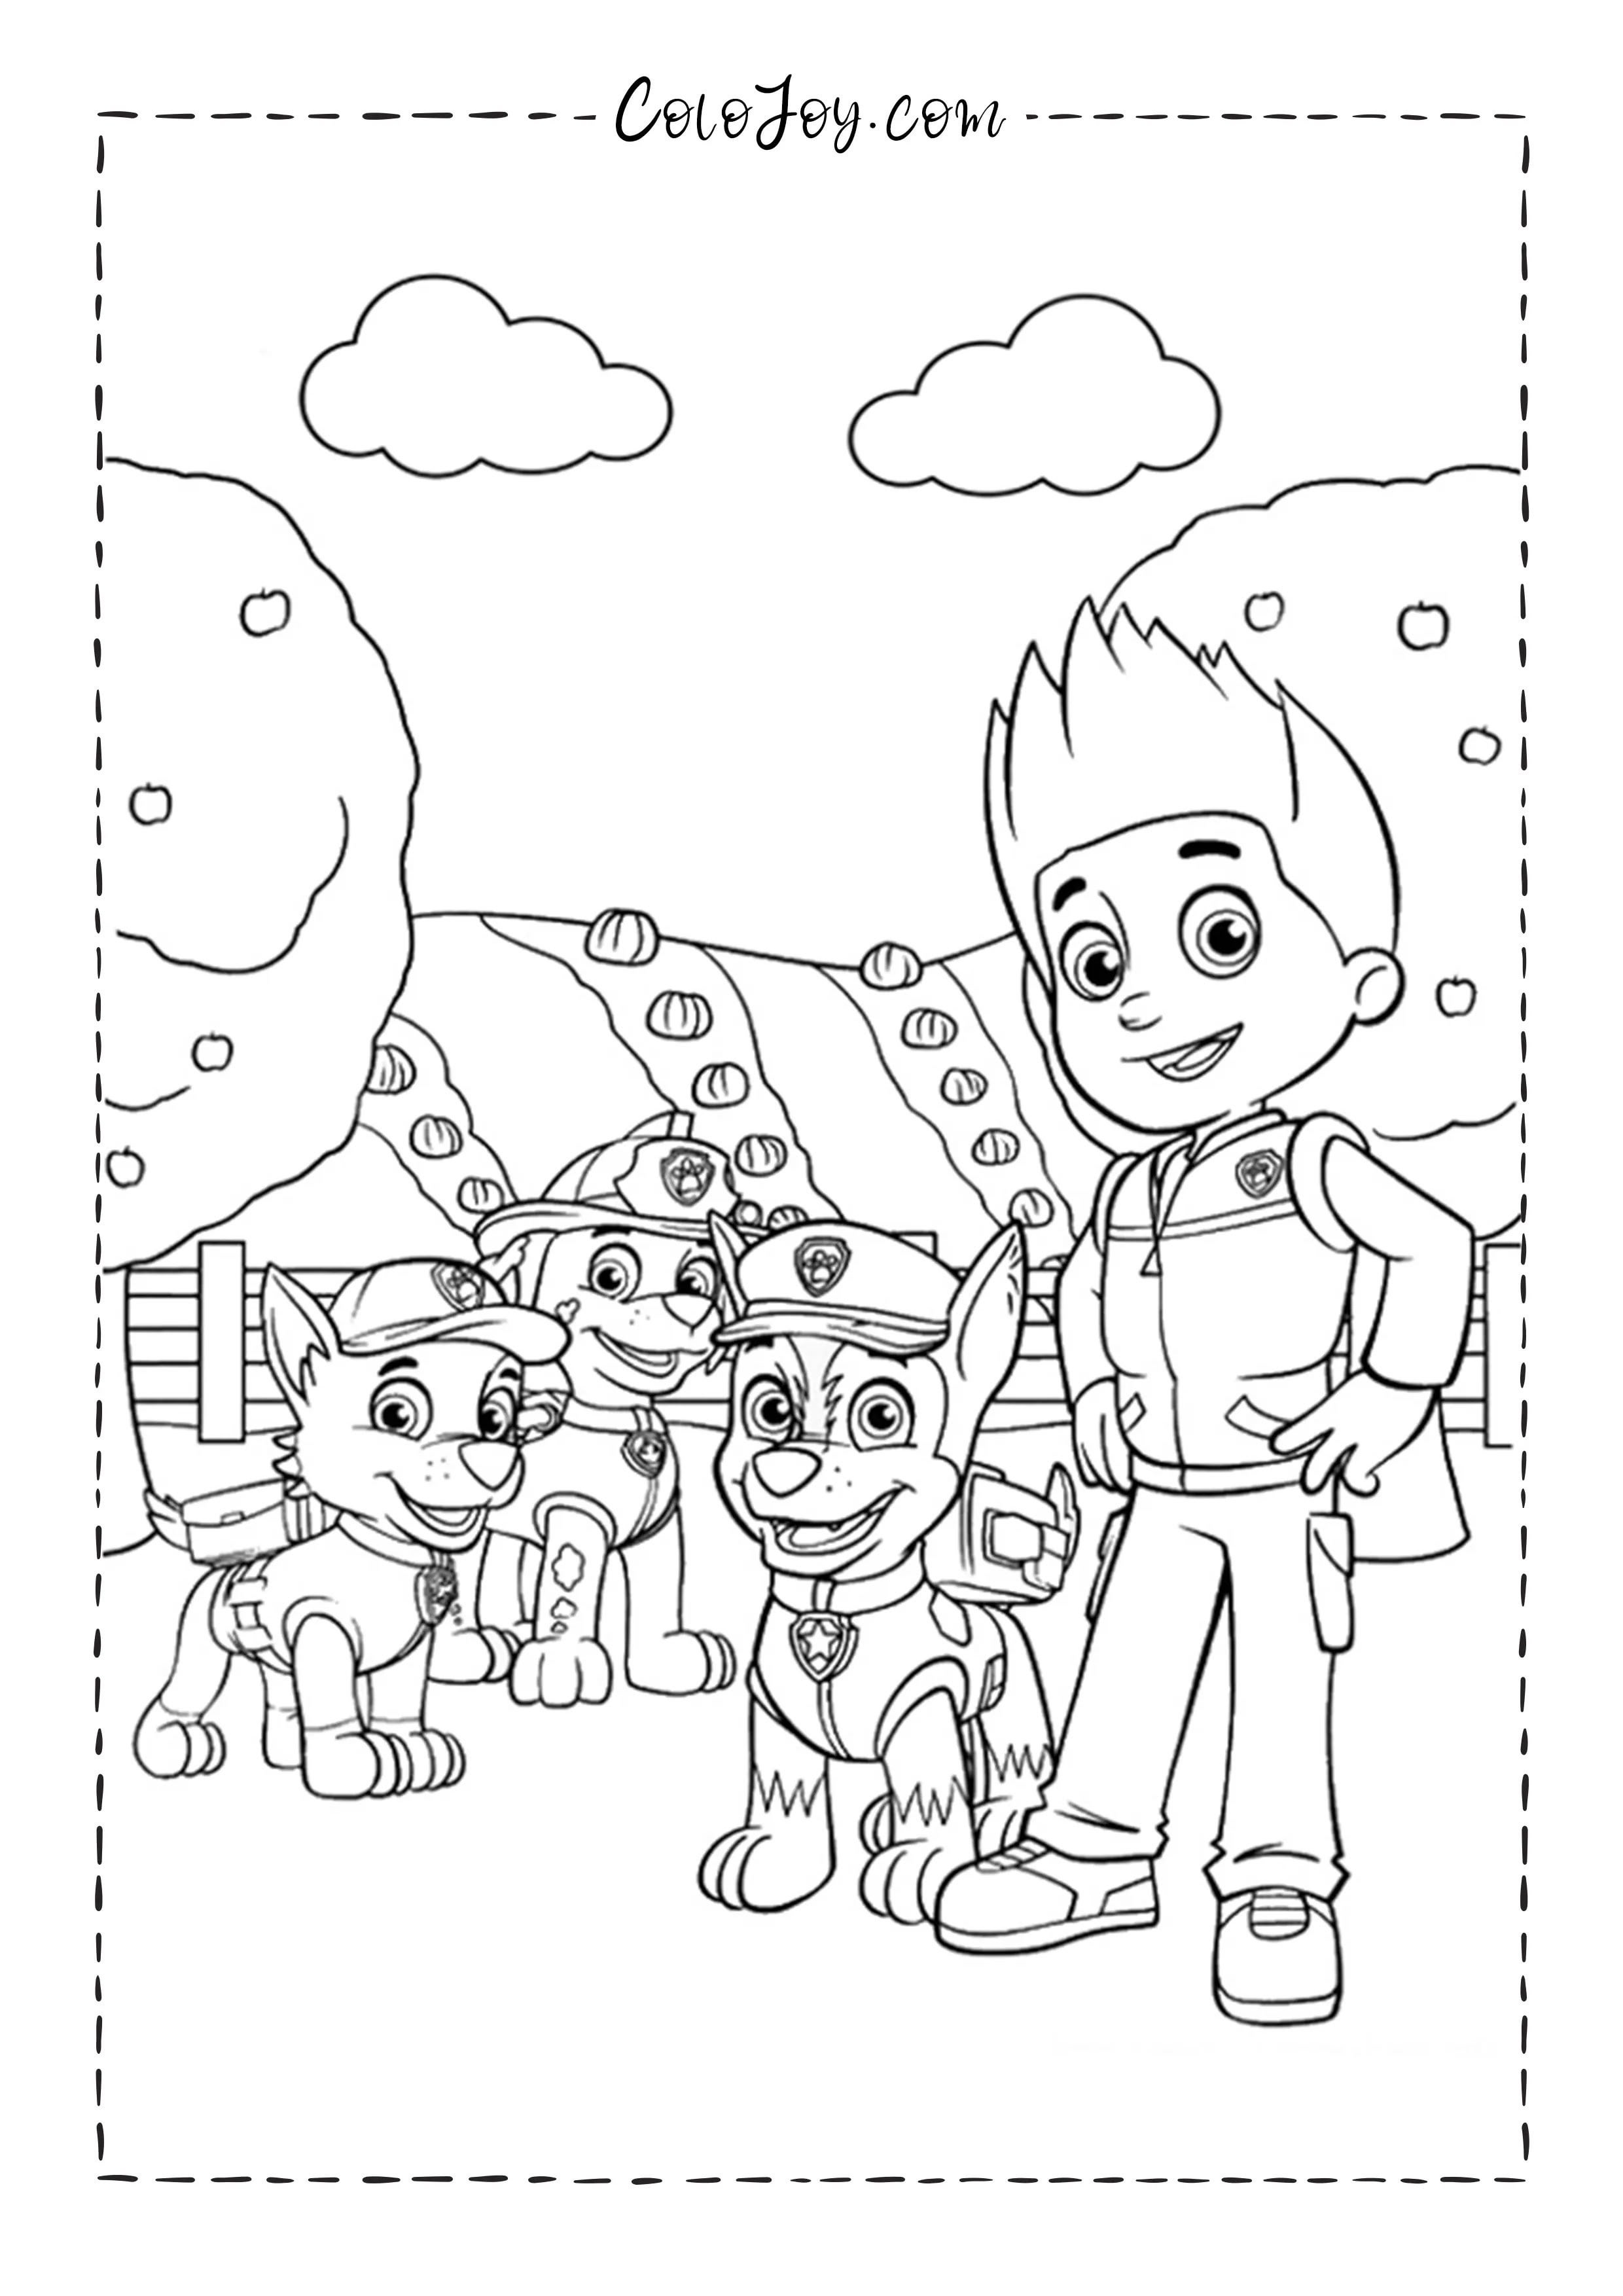 Paw patrol coloring pages for your kids rpainting